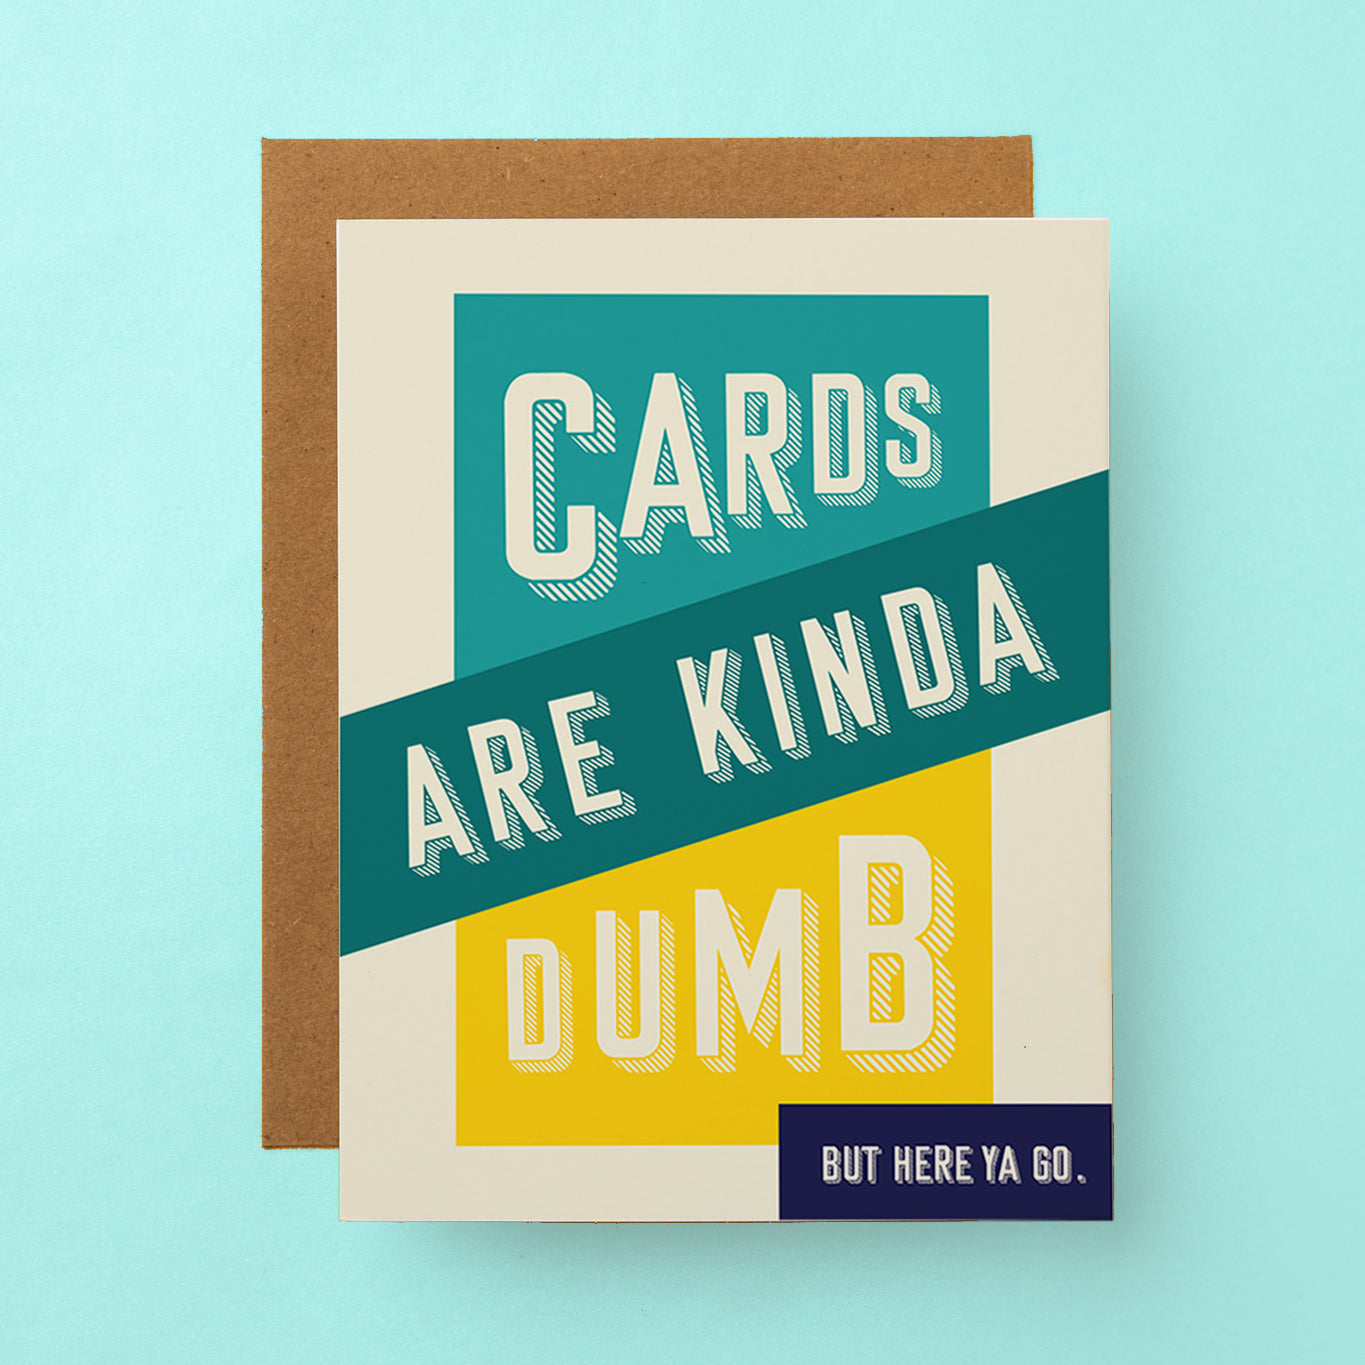 A sarcastic and funny greeting card that reads "Cards are kinda dumb, but here ya go." on the front.